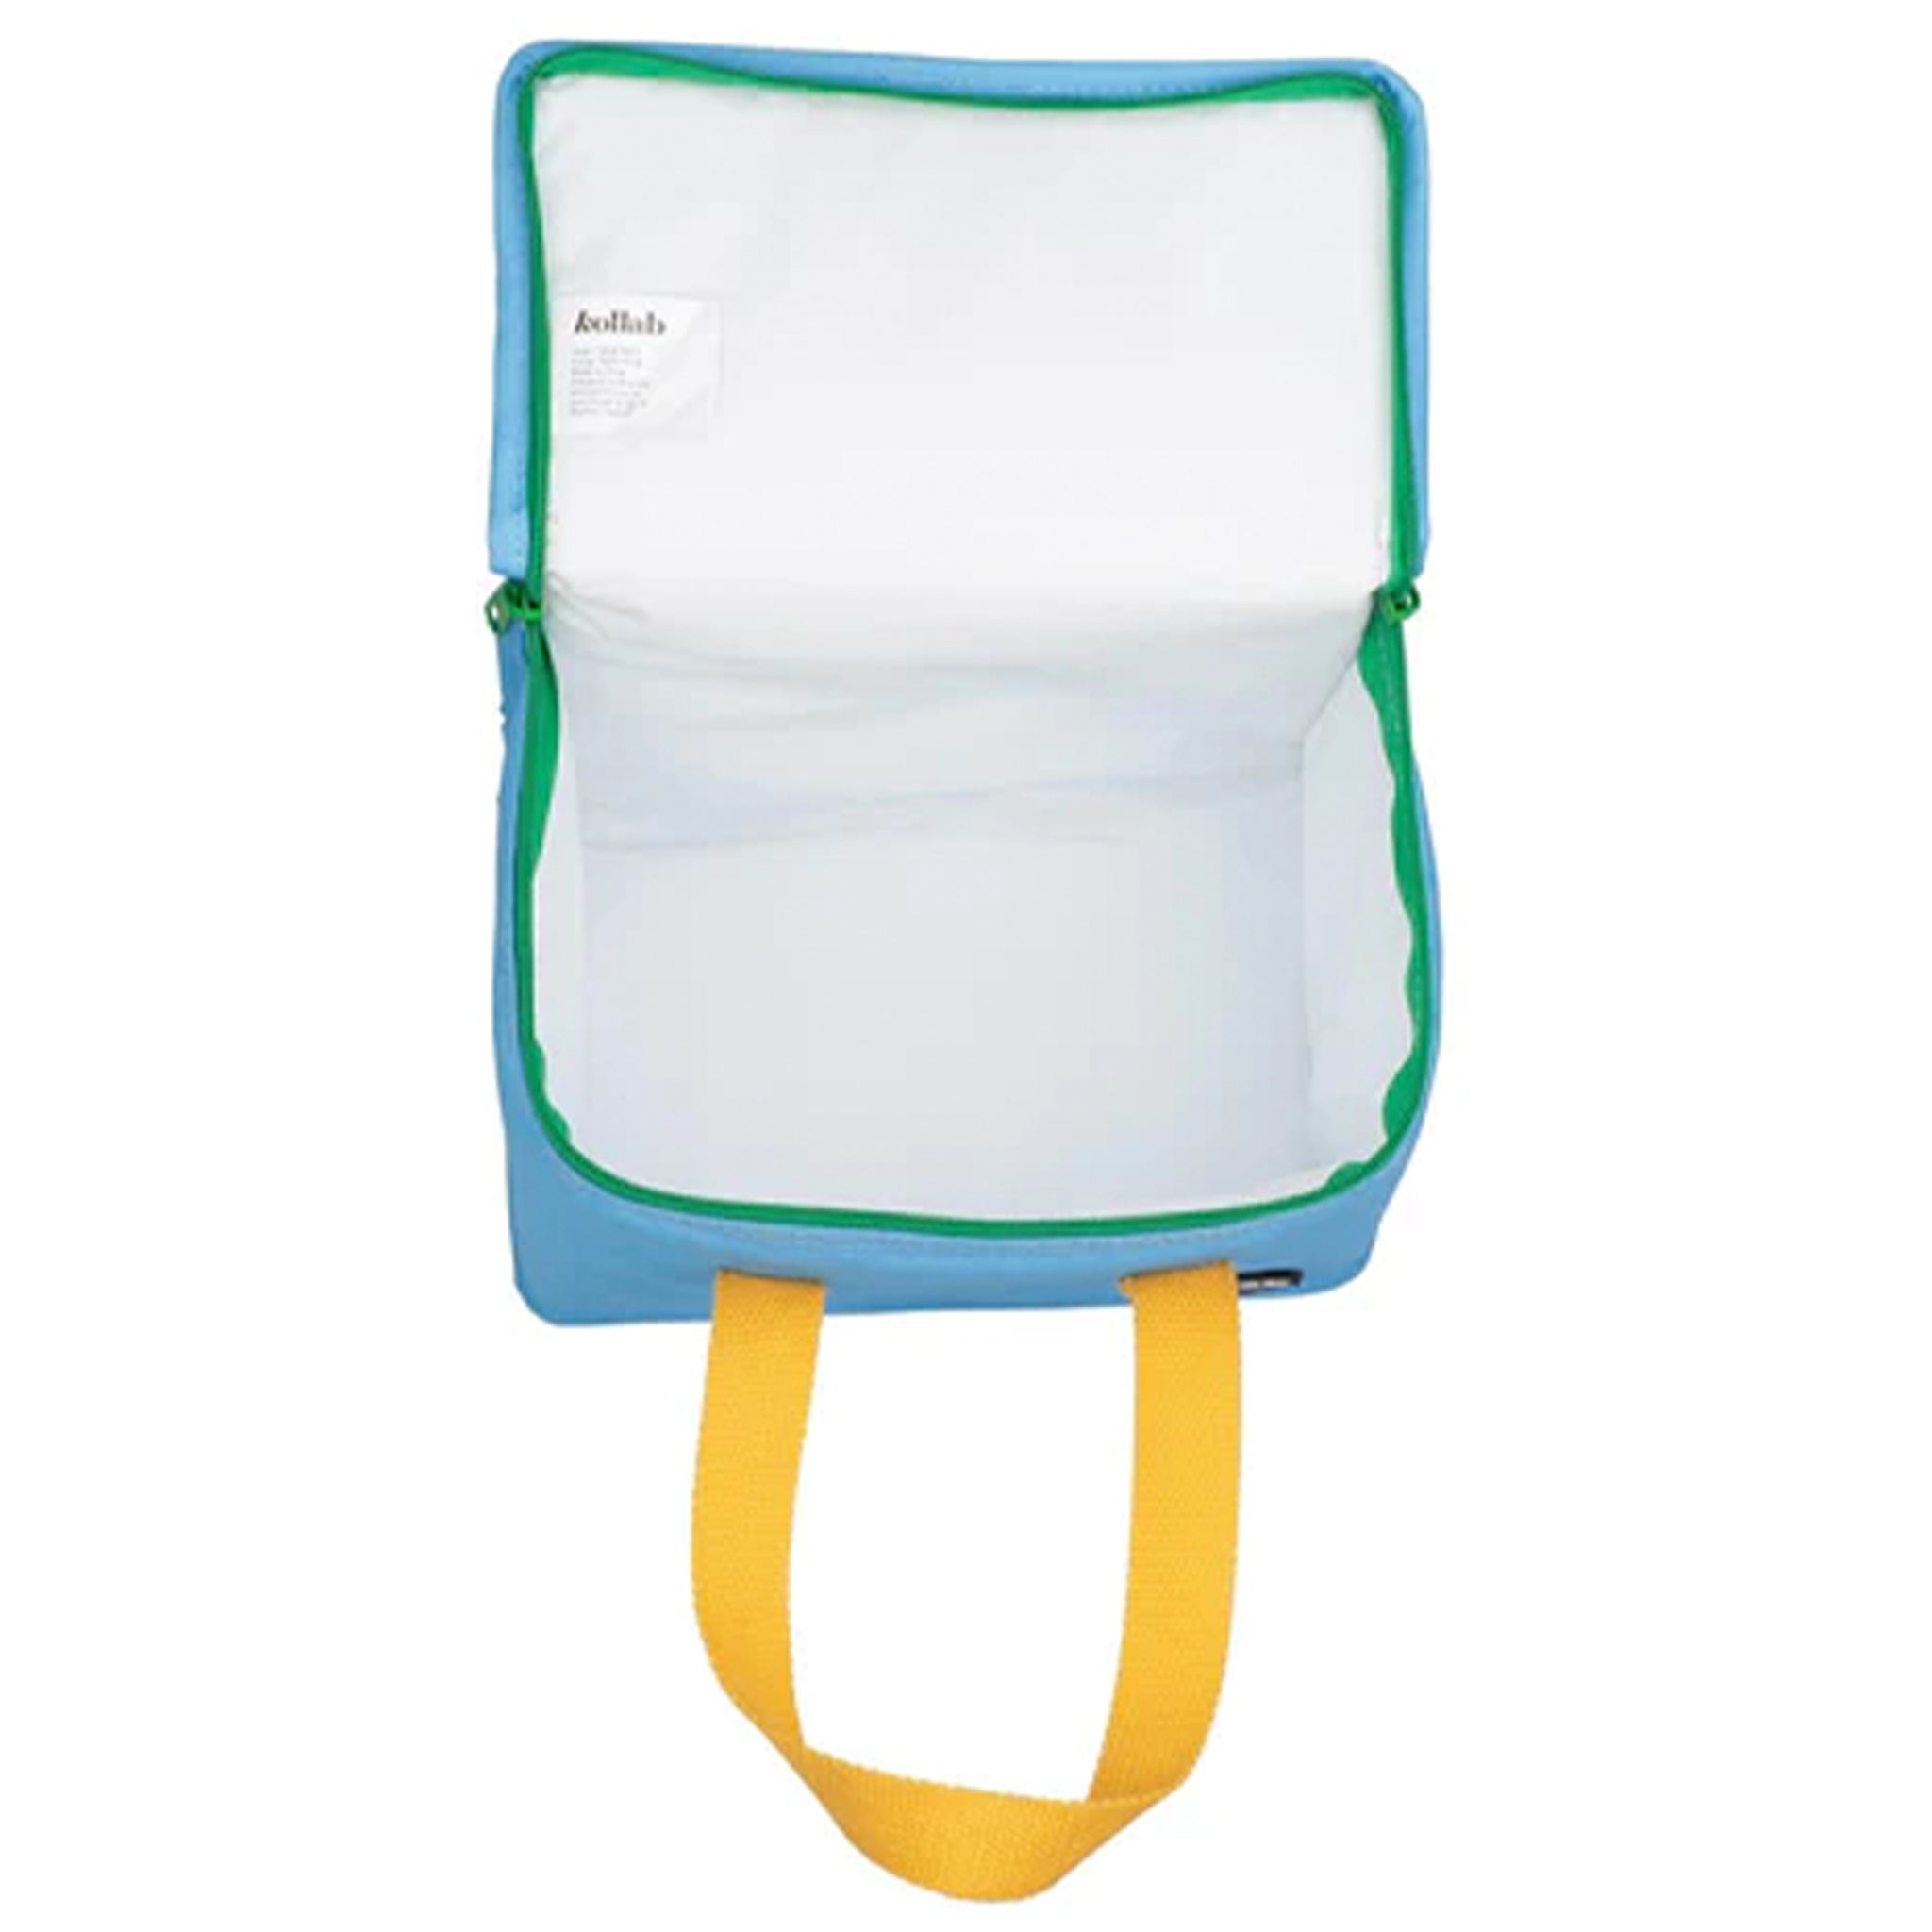 Kollab Insulated Lunch Box - Arctic Mint